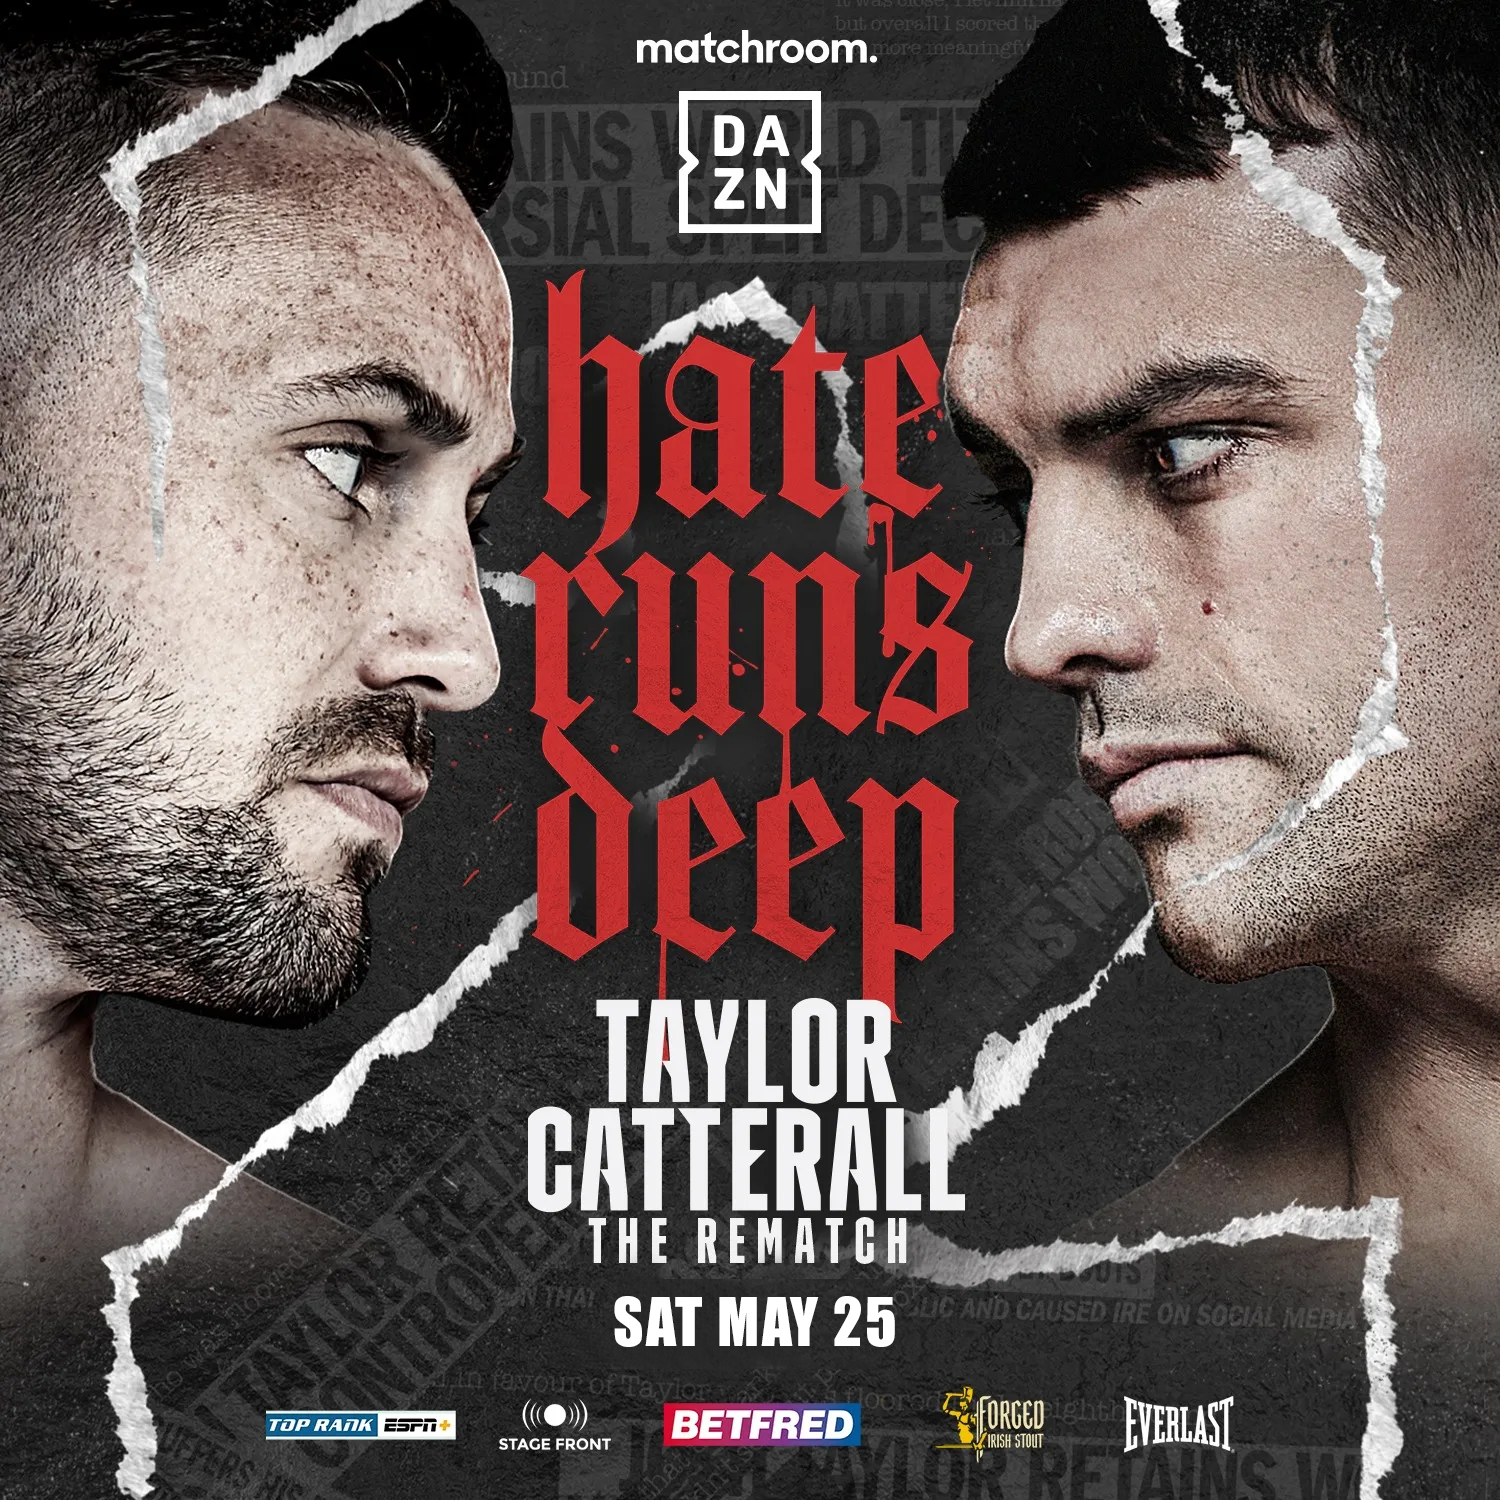 Josh Taylor v Jack Cantrell the rematch is back at Chicas Locas. Knockout entertainment awaits! Join us for the ultimate boxing showdown at our club!